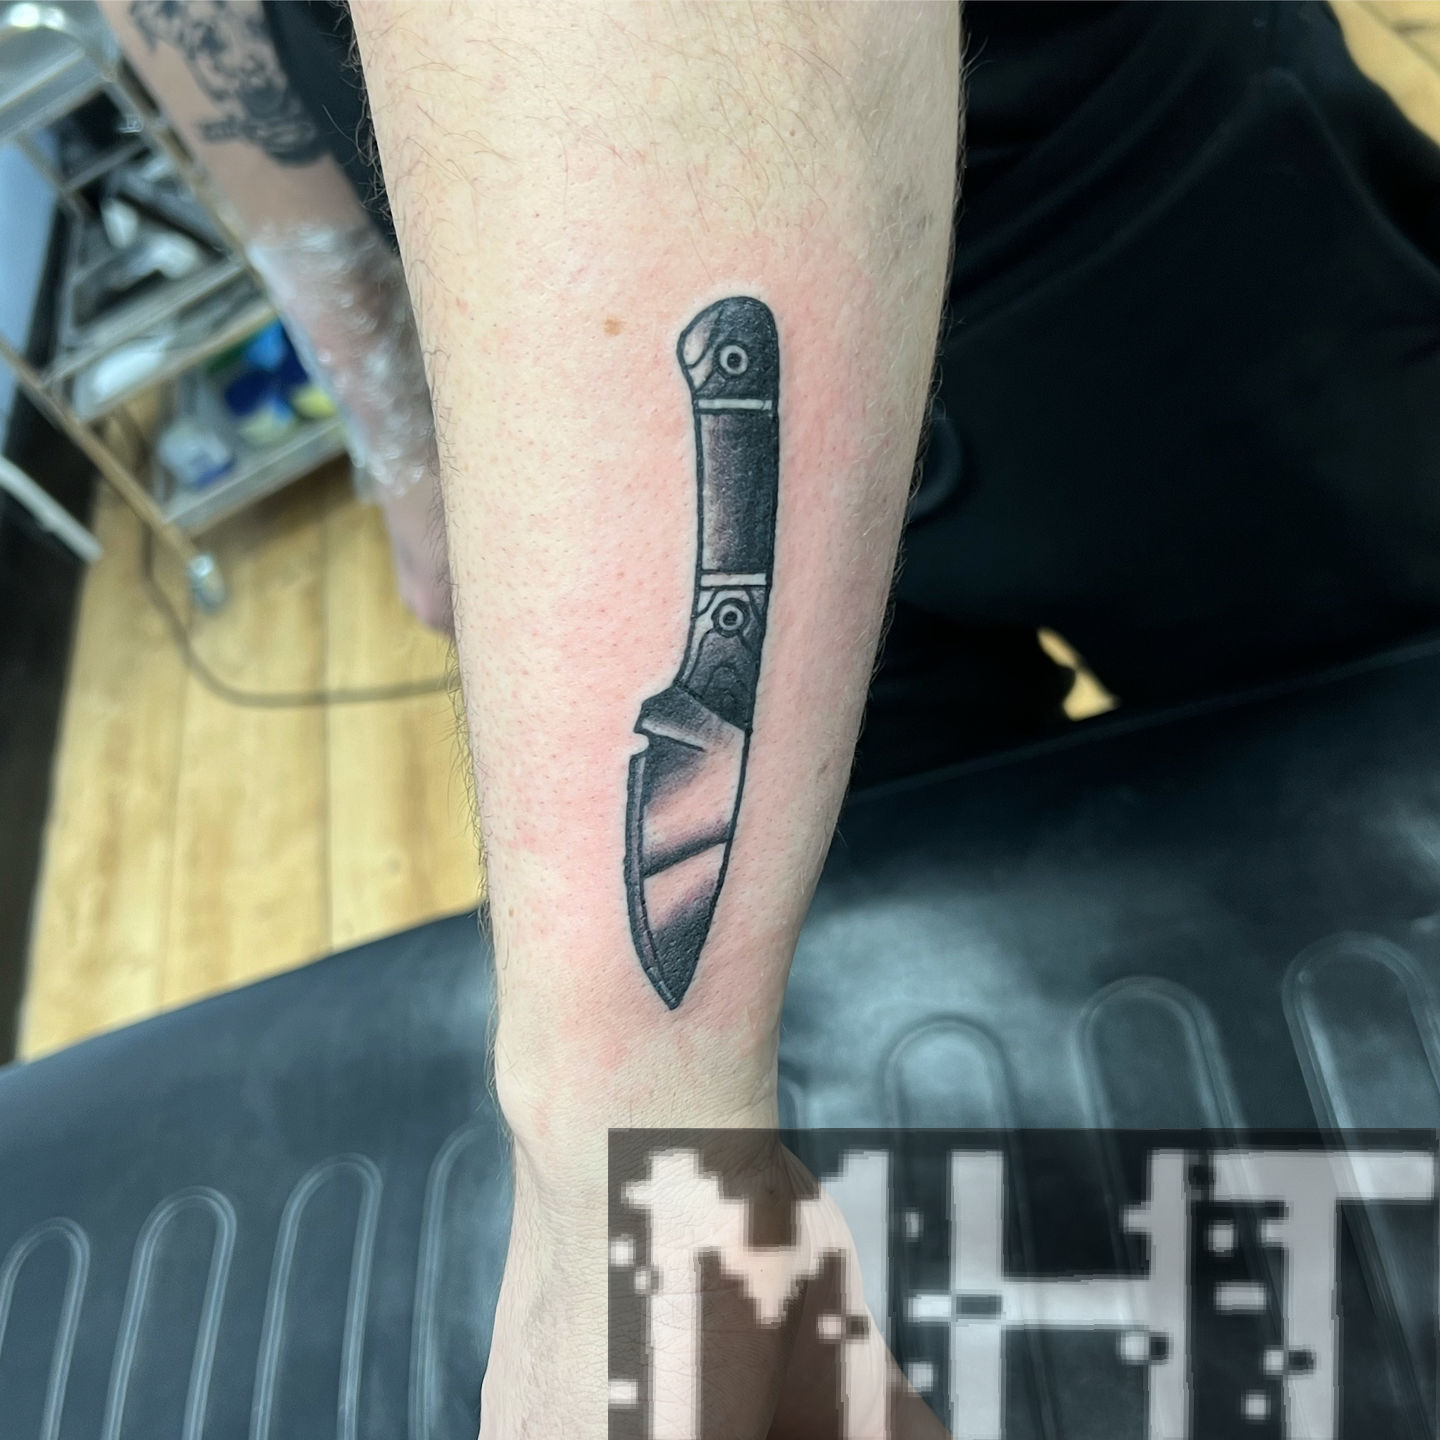 Knife with peonies by Ppippi at Black Serum in San Francisco CA  tattoos   Knife tattoo Tattoos Sleeve tattoos